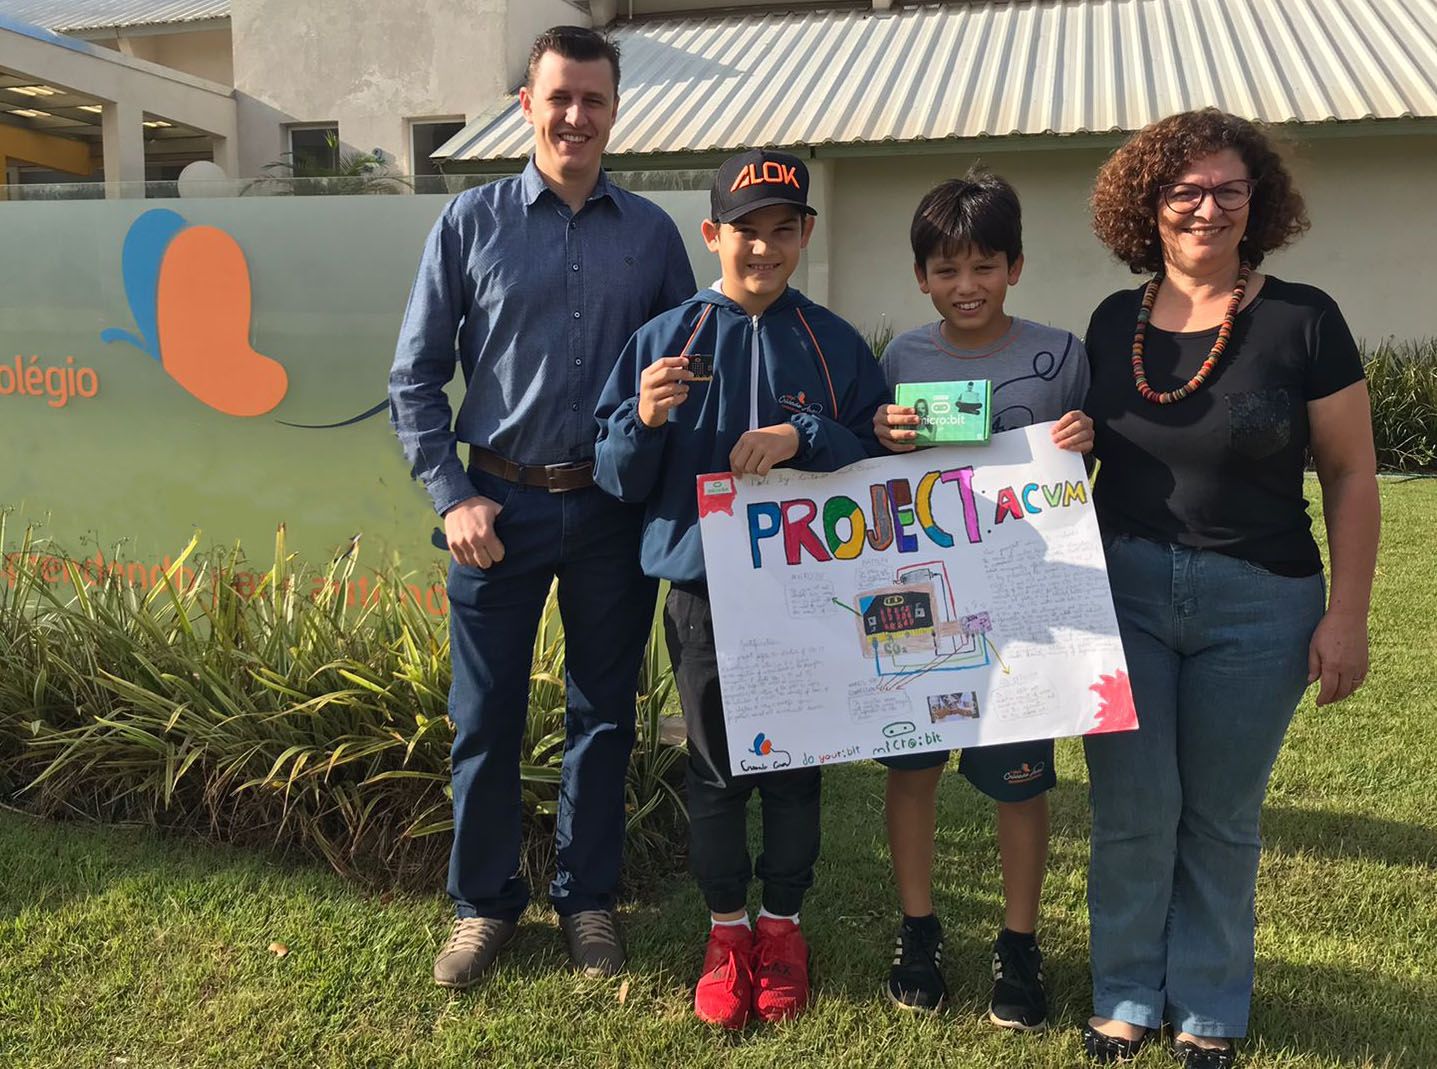 Vinicius and Antonio holding their design poster outside school with their teachers